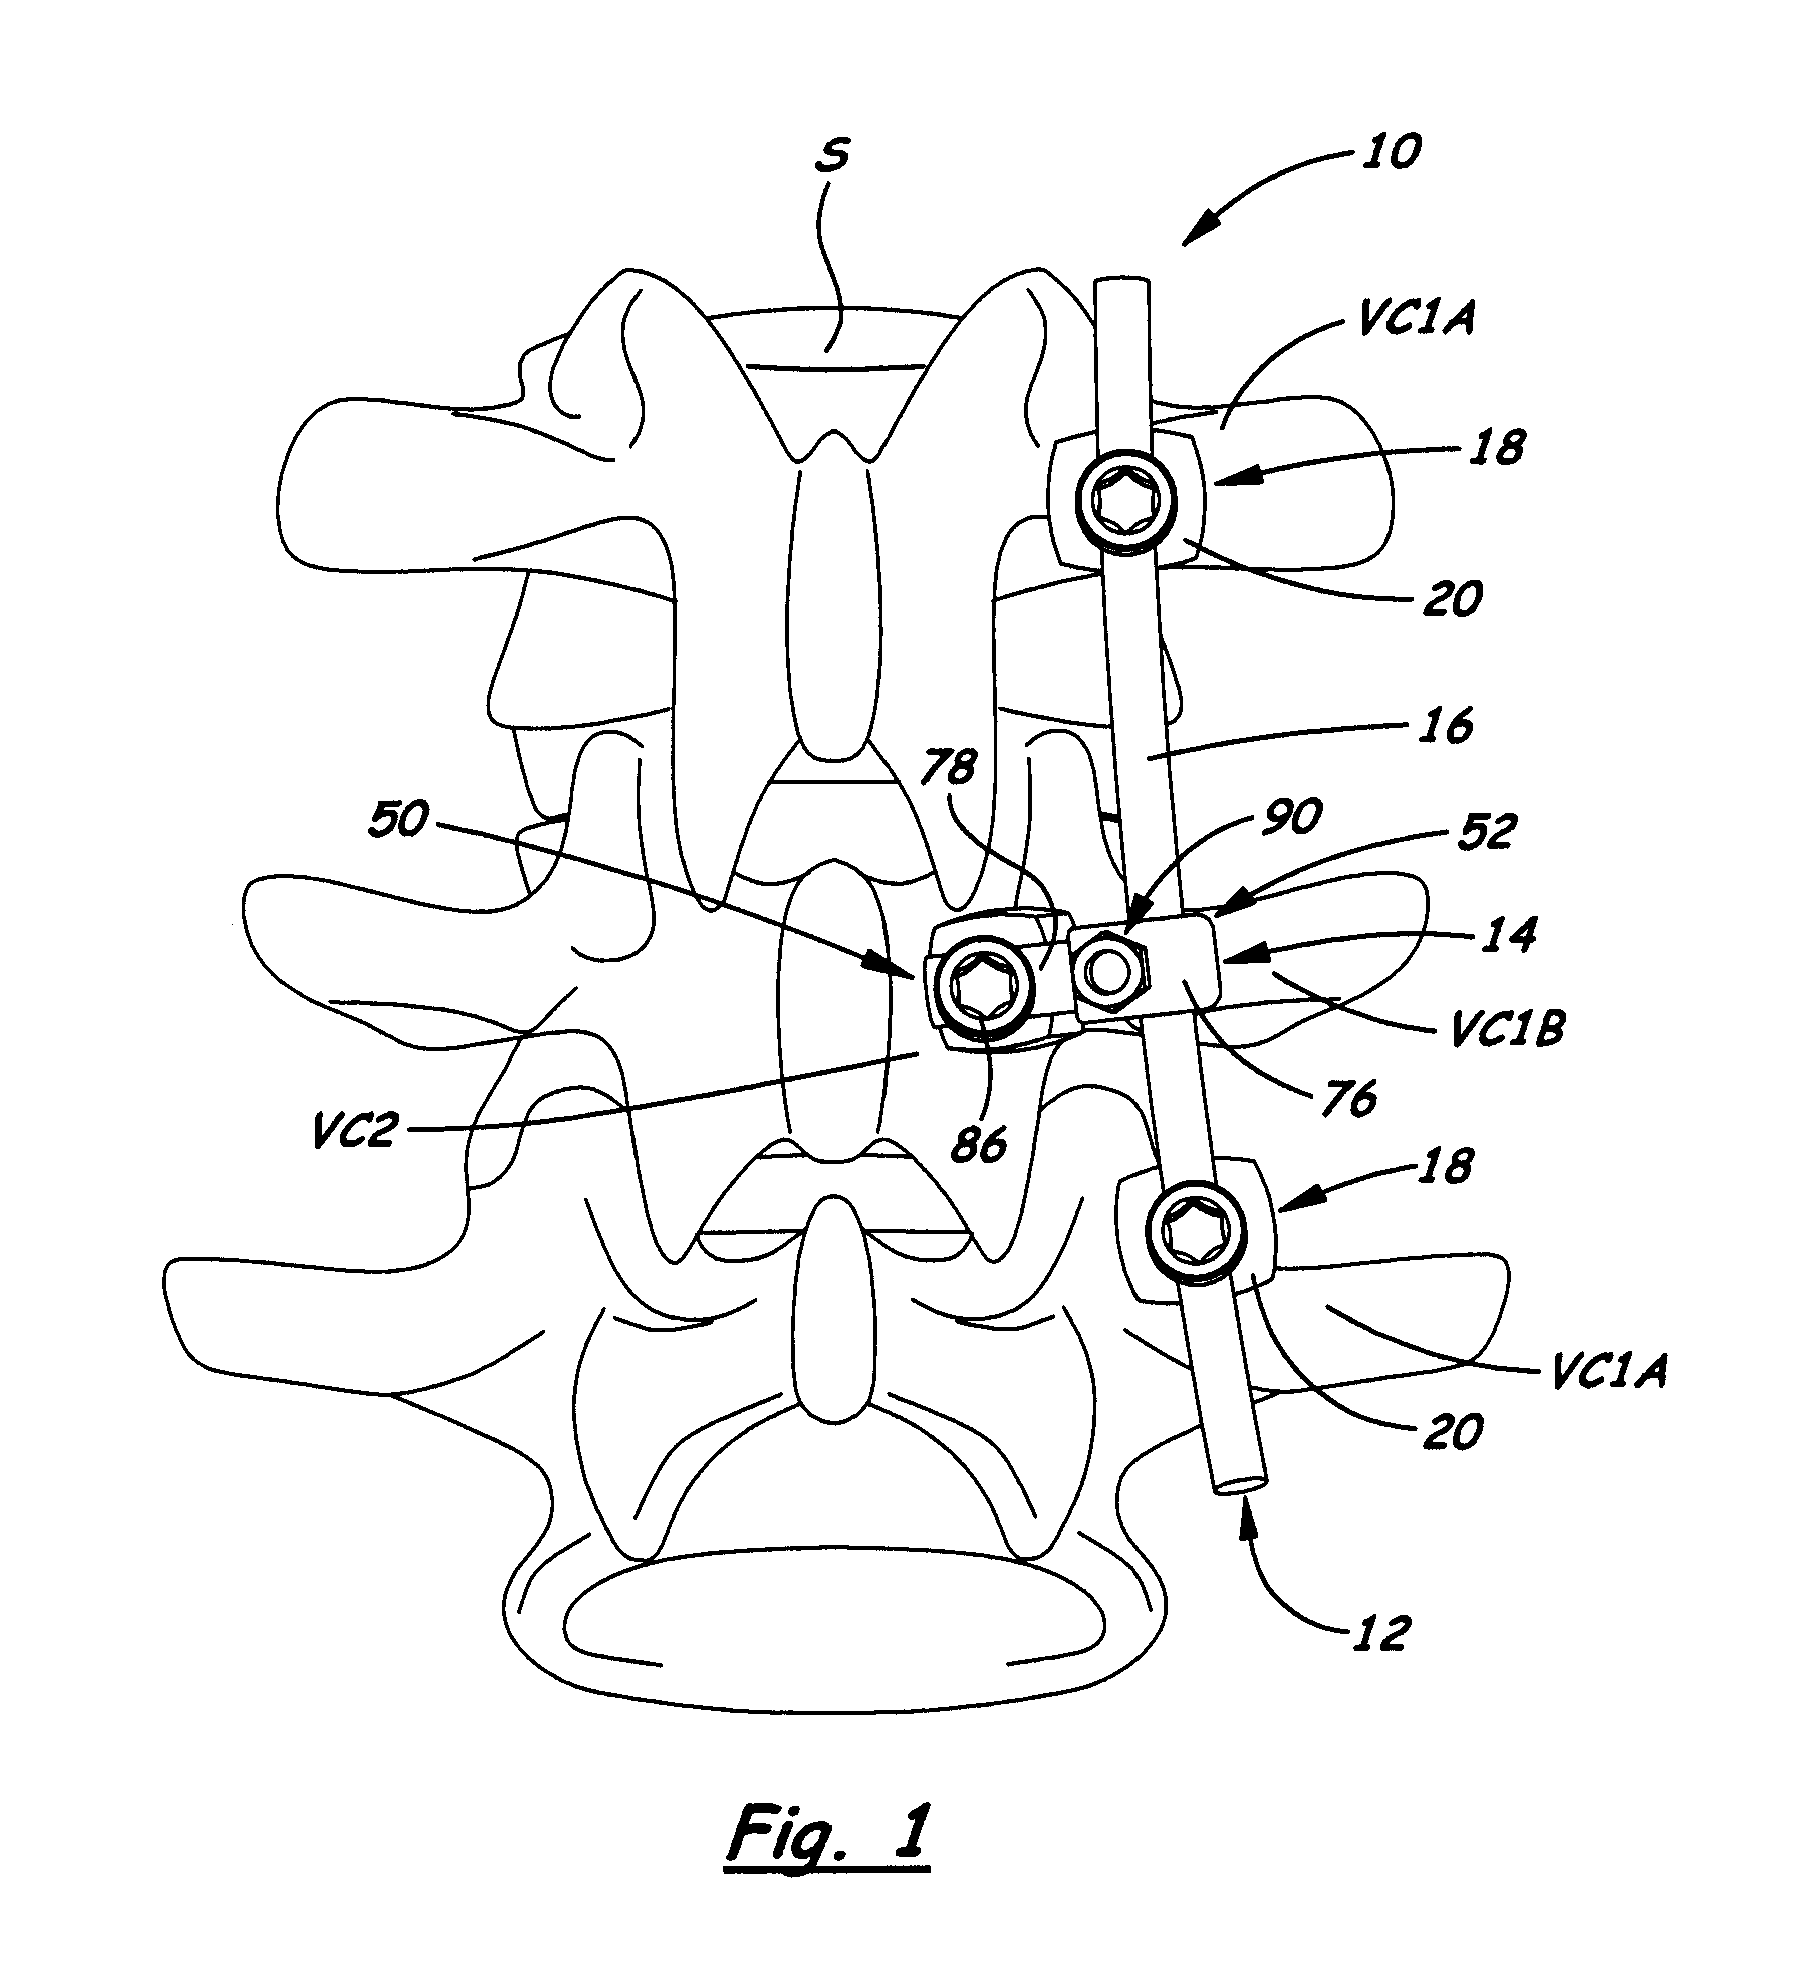 Apparatus for implementing a spinal fixation system with supplemental fixation